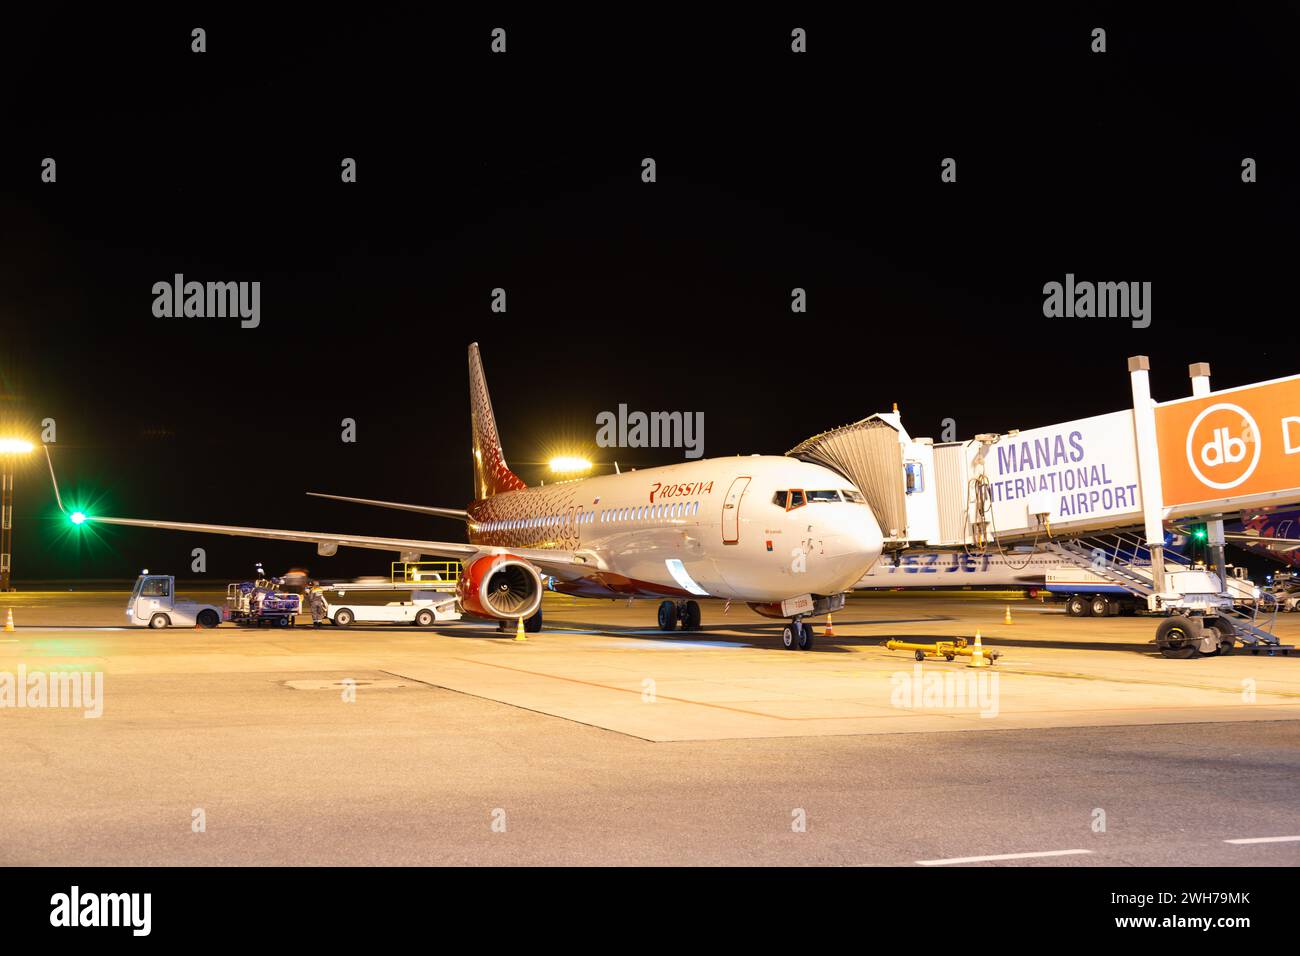 Bishkek, Kyrgyzstan - September 26, 2023: Rossiya Russian Airline plane with jetway at the Manas International Airport at night Stock Photo